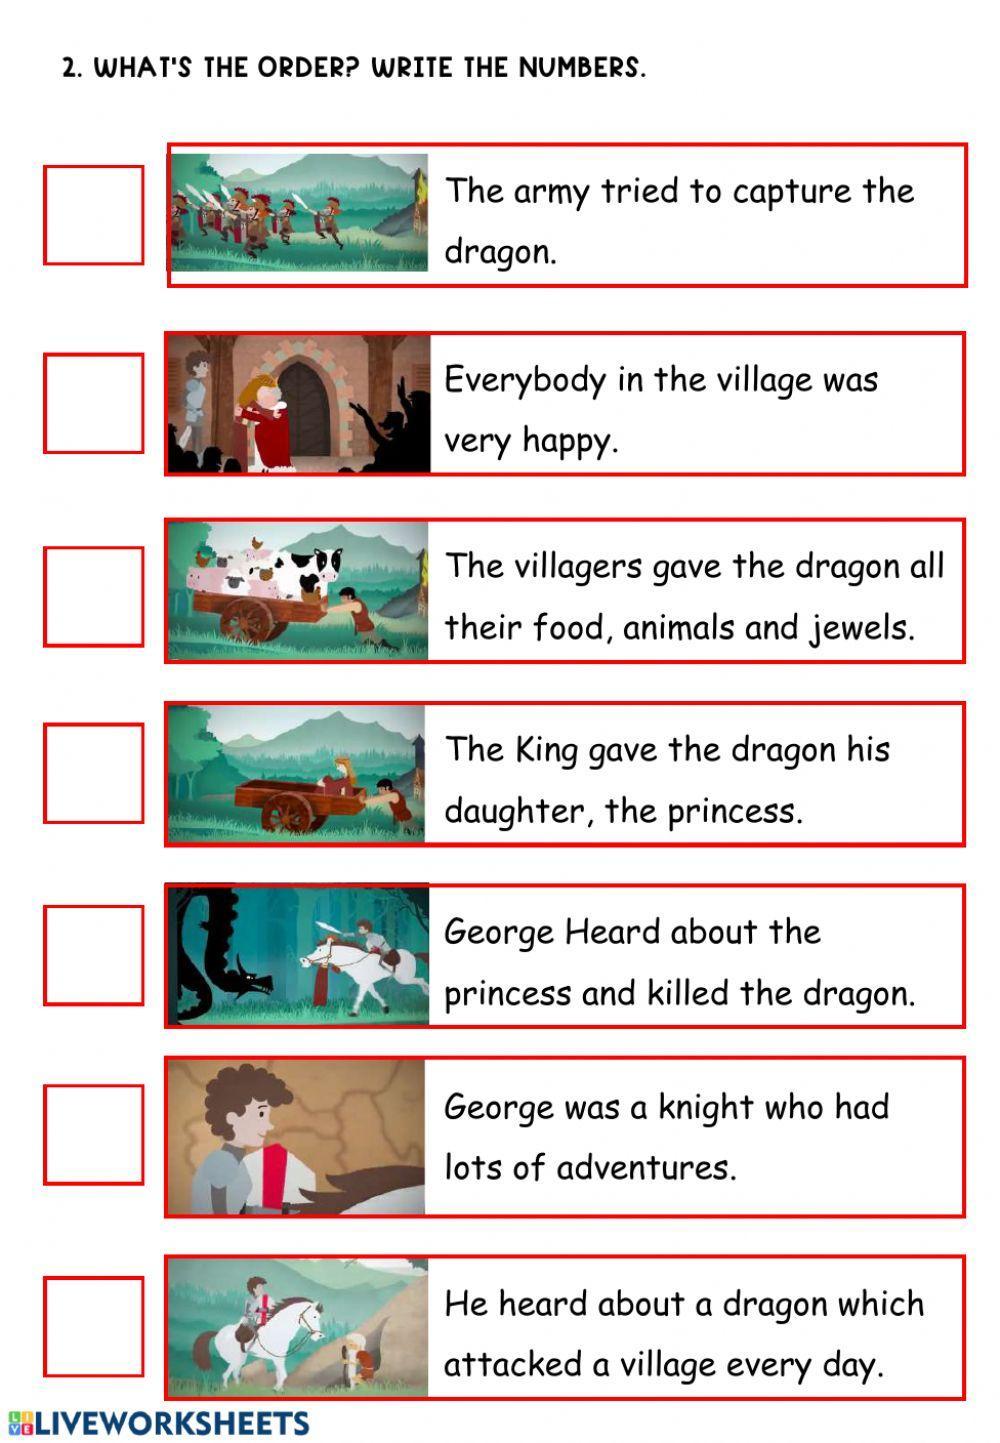 George and the dragon 3-4